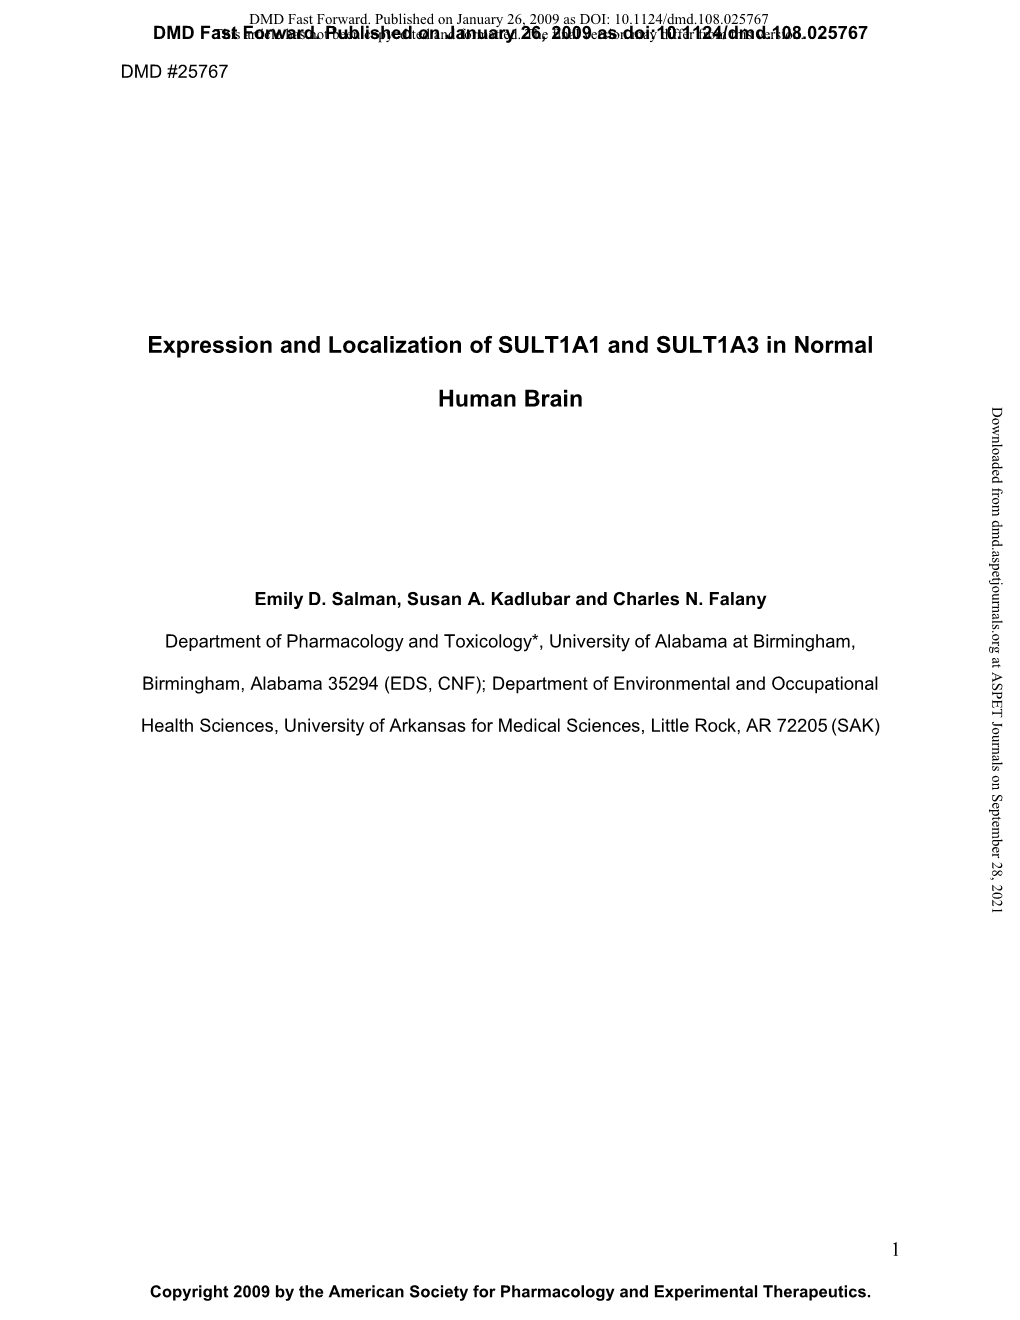 Expression and Localization of SULT1A1 and SULT1A3 in Normal